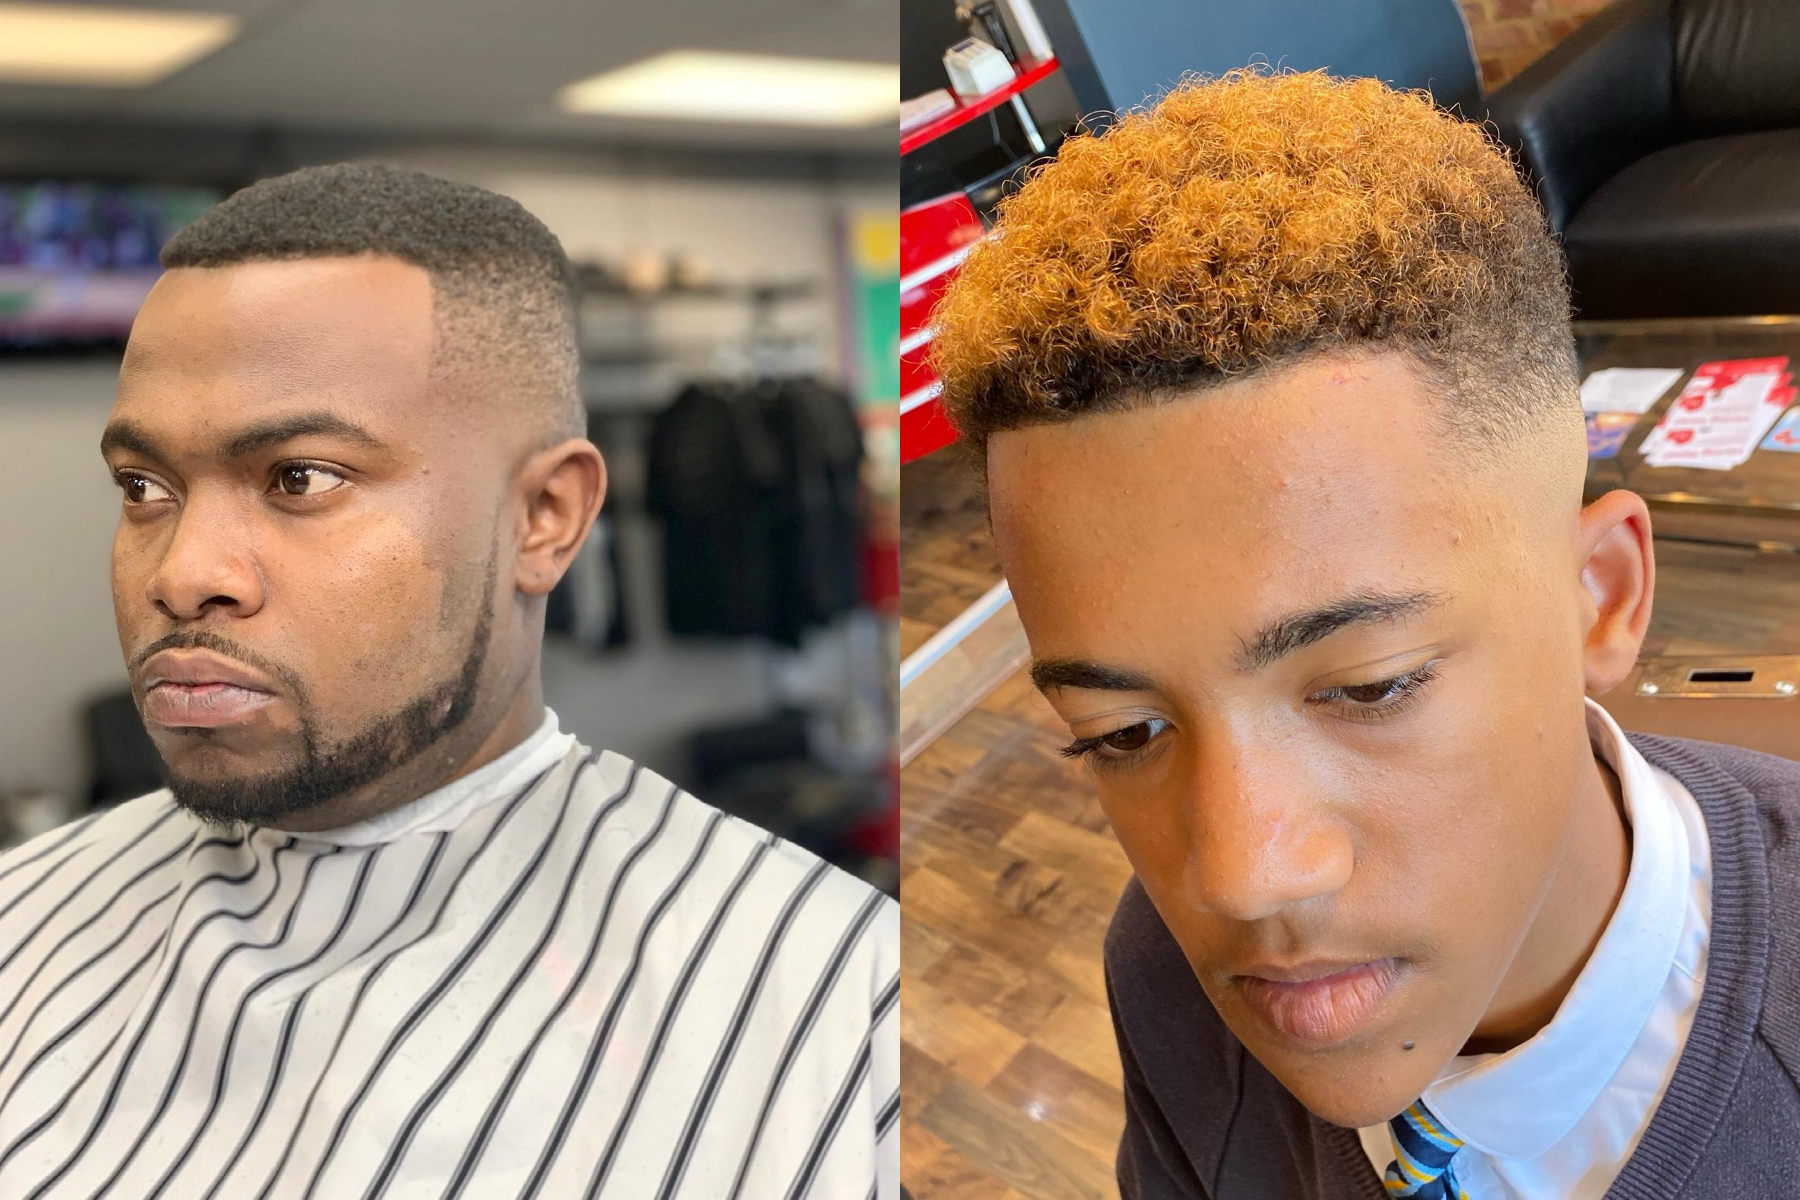 55 Attractive Hairstyles for Black Men in 2022 (Images + Video) | Afro hairstyles  men, Afro hairstyles, Hairstyles haircuts